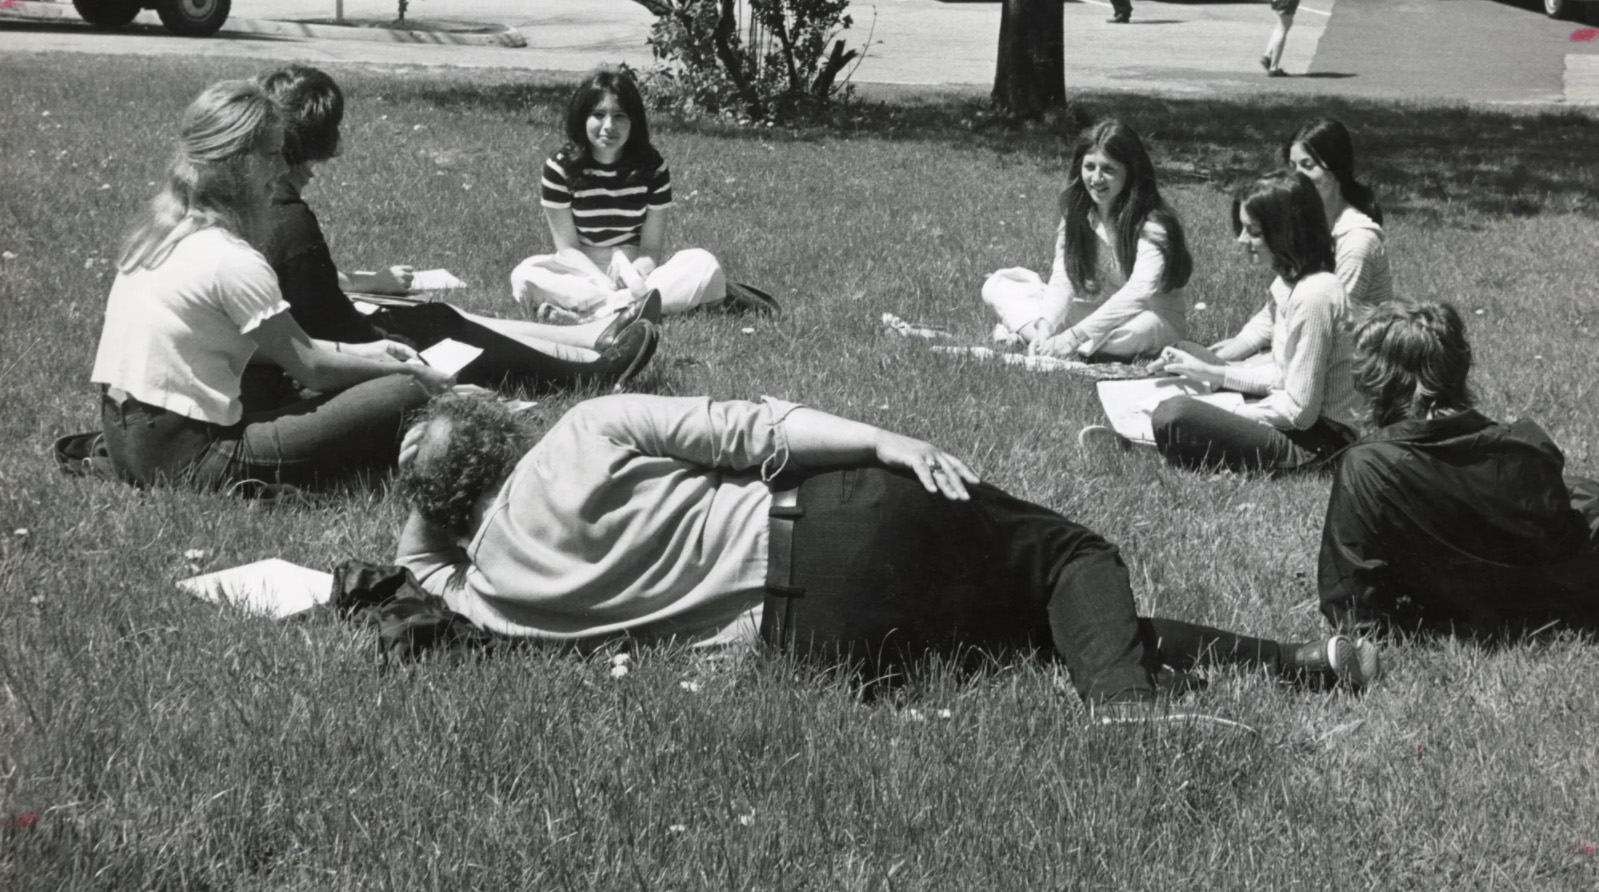 Students seated on lawn